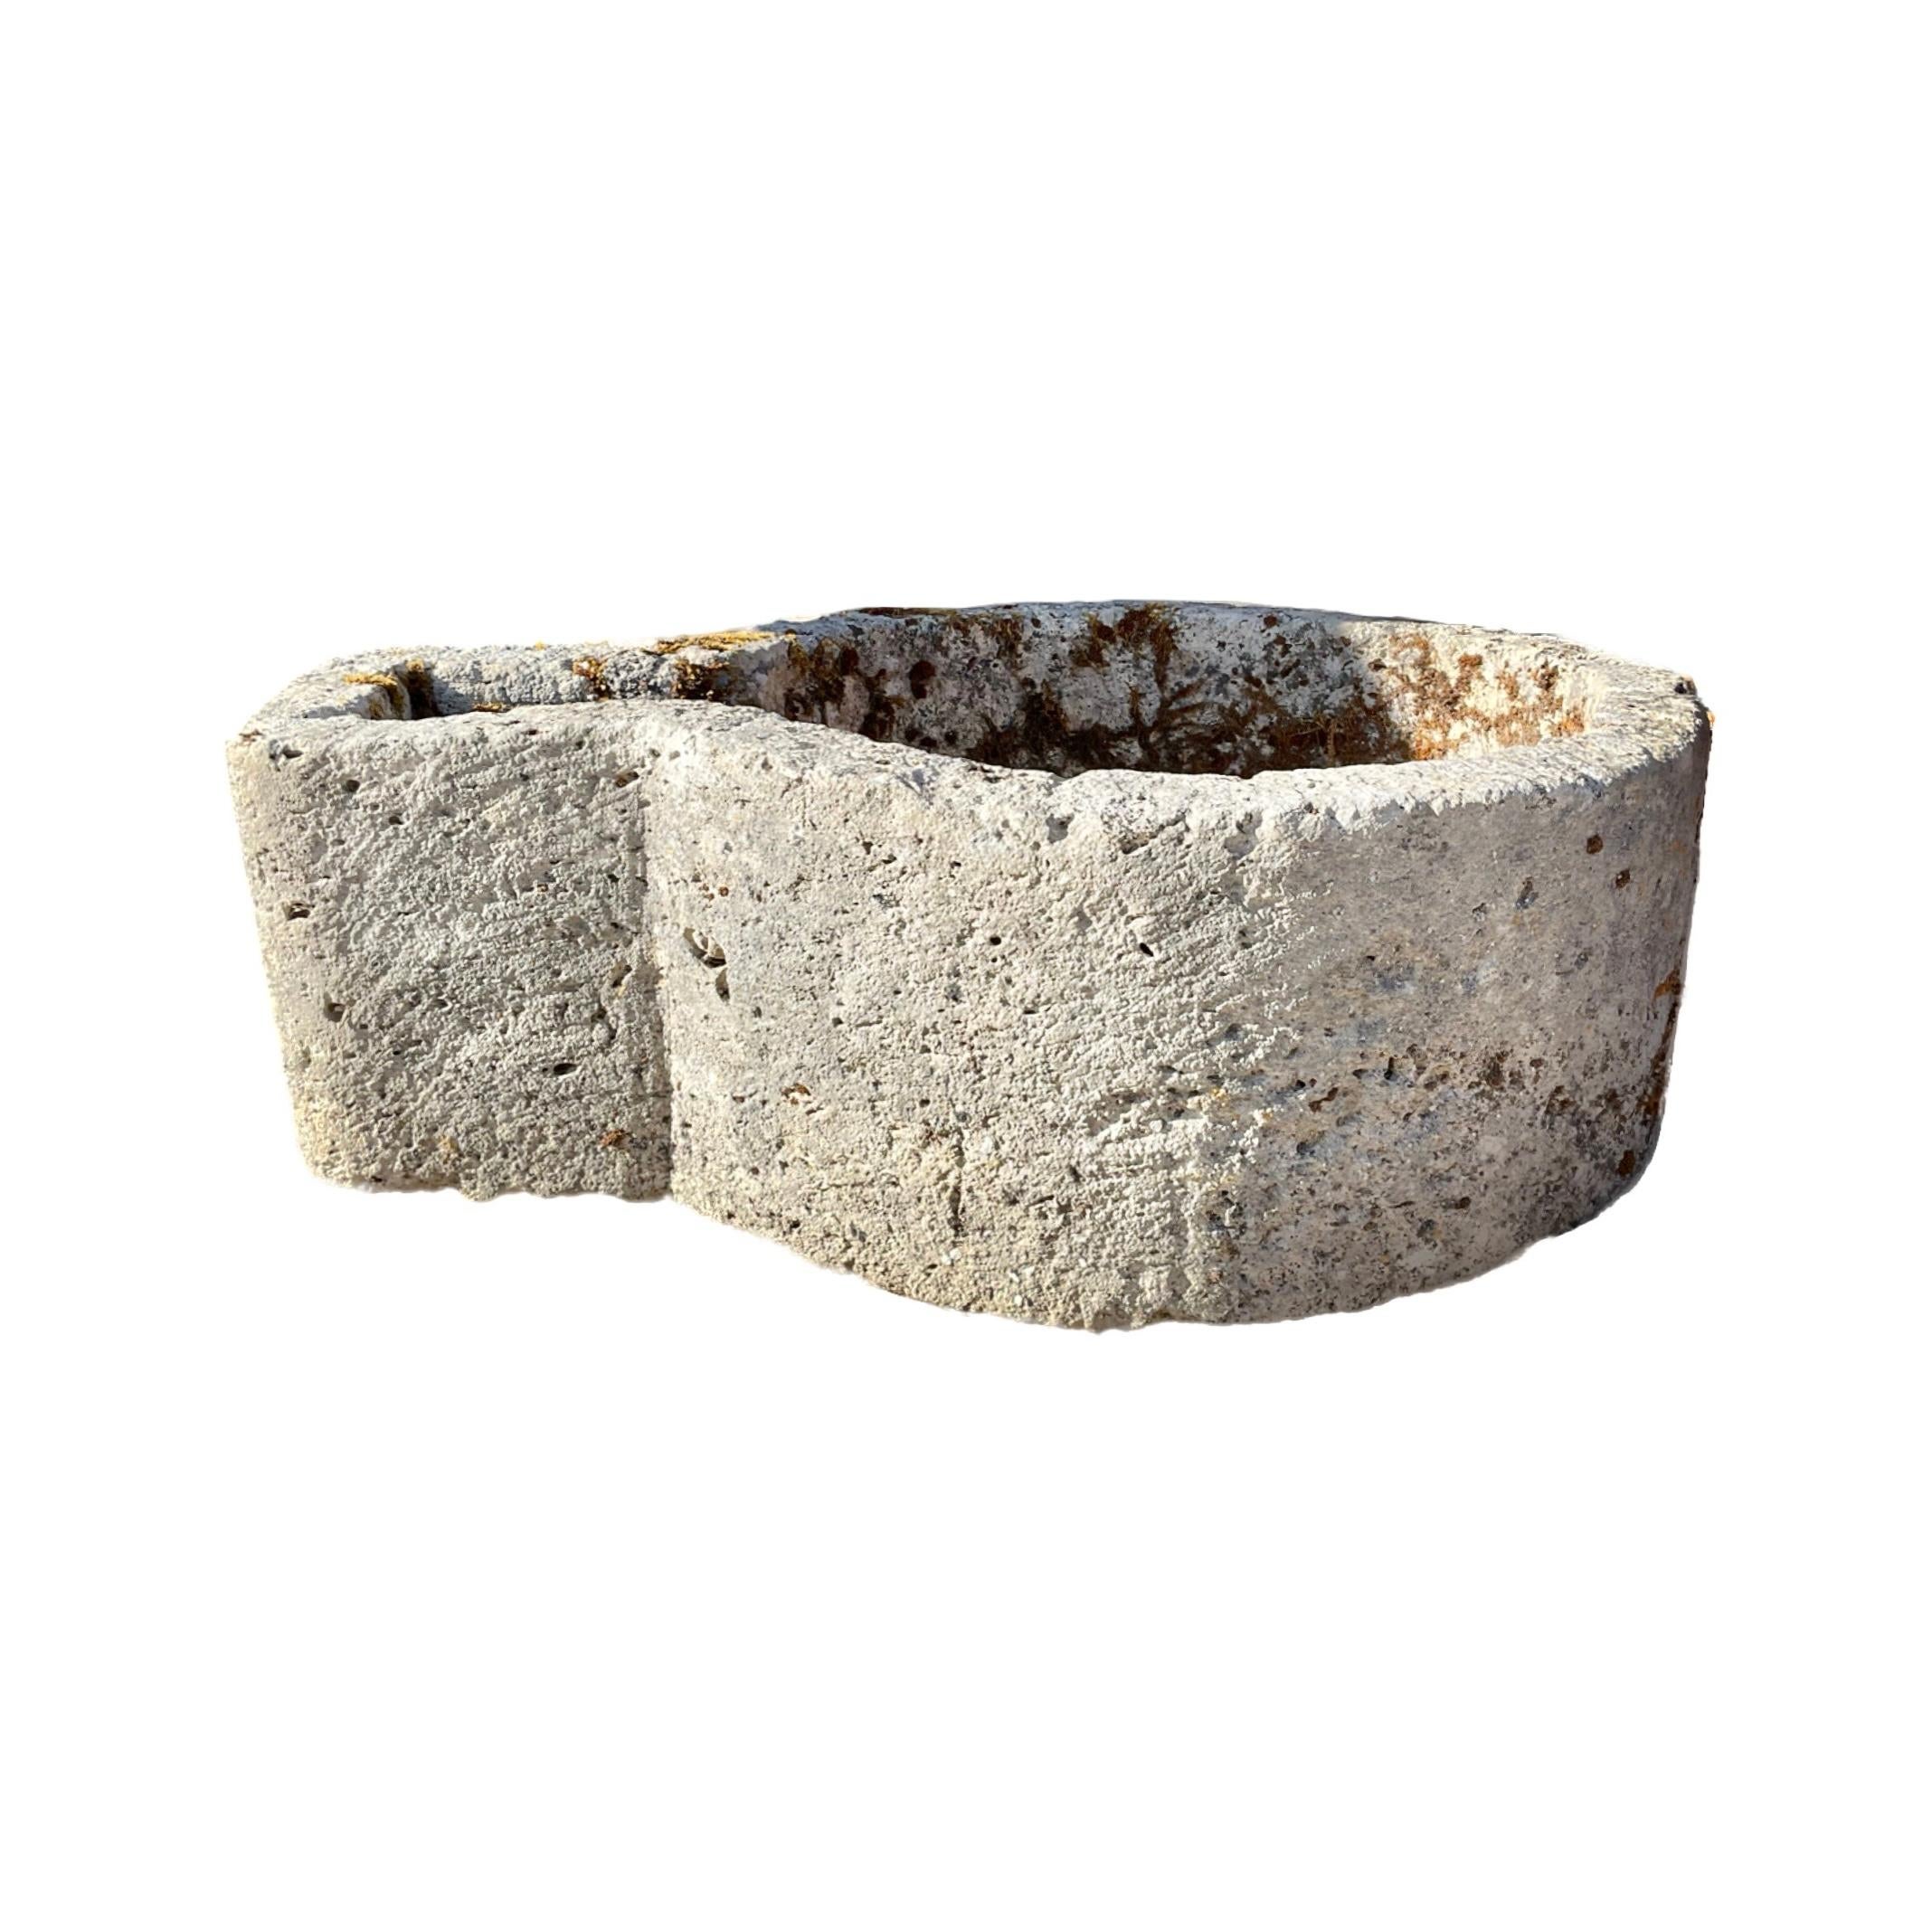 This French Limestone Ham Trough, dating back to the 17th century, adds a touch of history to any space. Originally used to cure and season ham in France, it now serves as a unique planter or small birdbath. Made of durable limestone, it will bring